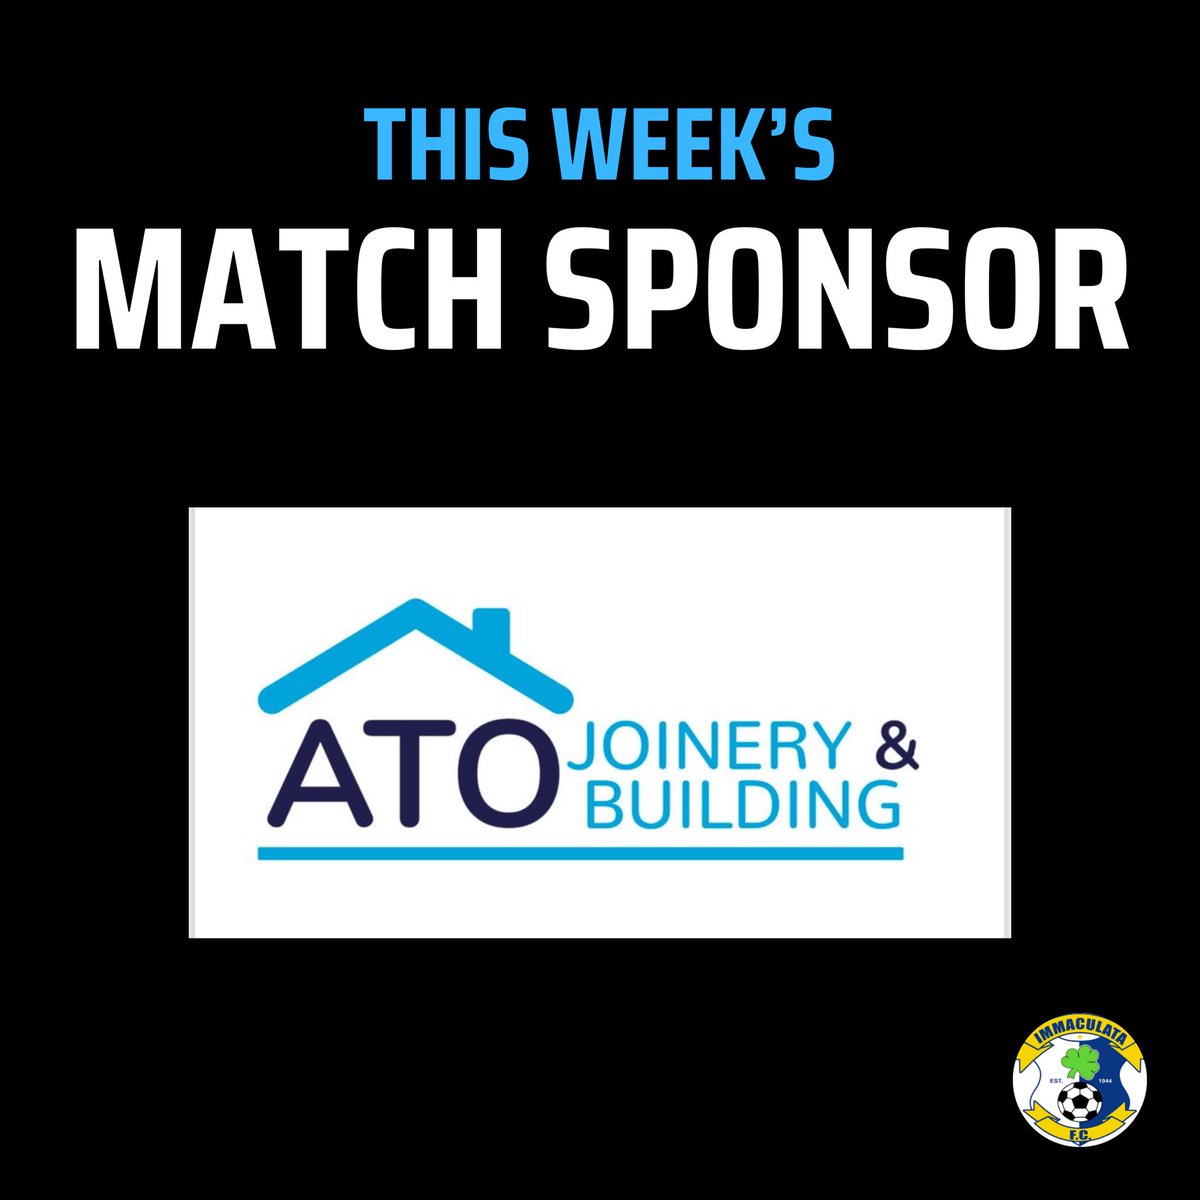 FIXTURES - SATURDAY 04 NOVEMBER ⚽️ This week’s game is sponsored by ATO Joinery & Building. They offer shop fit outs , renovations, bathroom refurbs, loft conversions & much more! You can contact them on 077831 20035 or email atojoinery.building@gmail.com #GOTM 💙